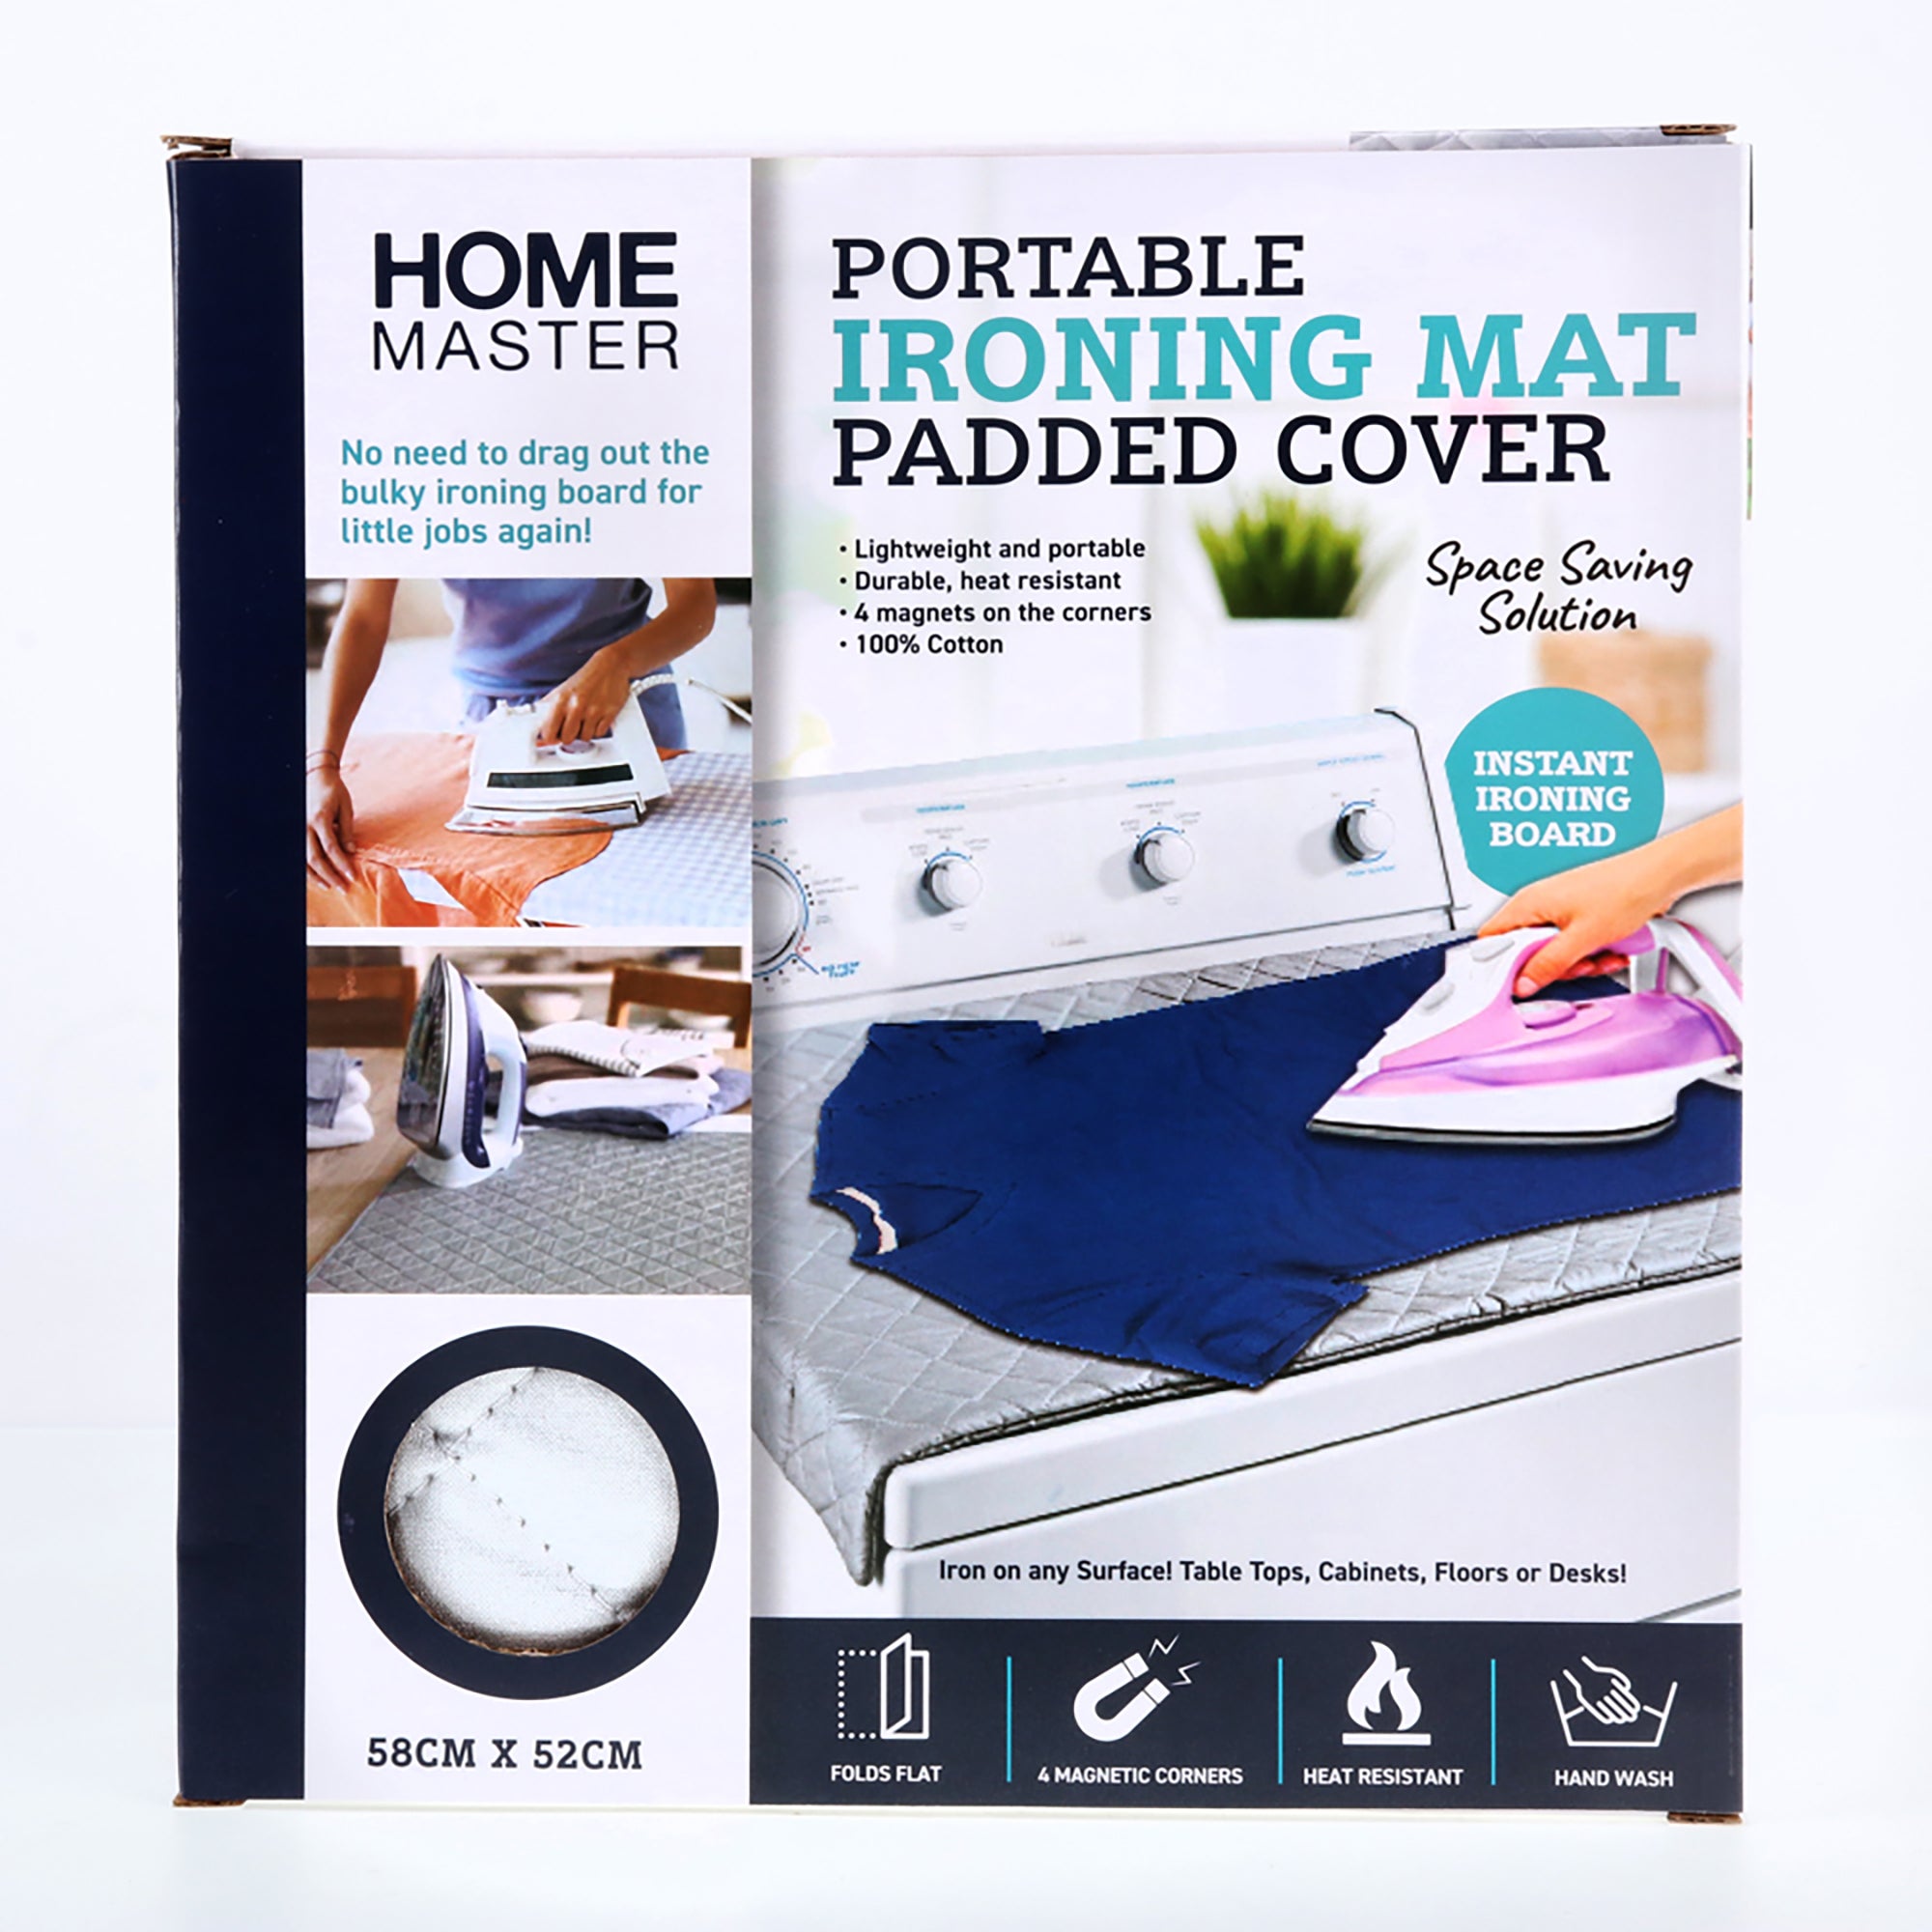 Portable Ironing Mat 58cm X 52cm, Laundry and Cleaning